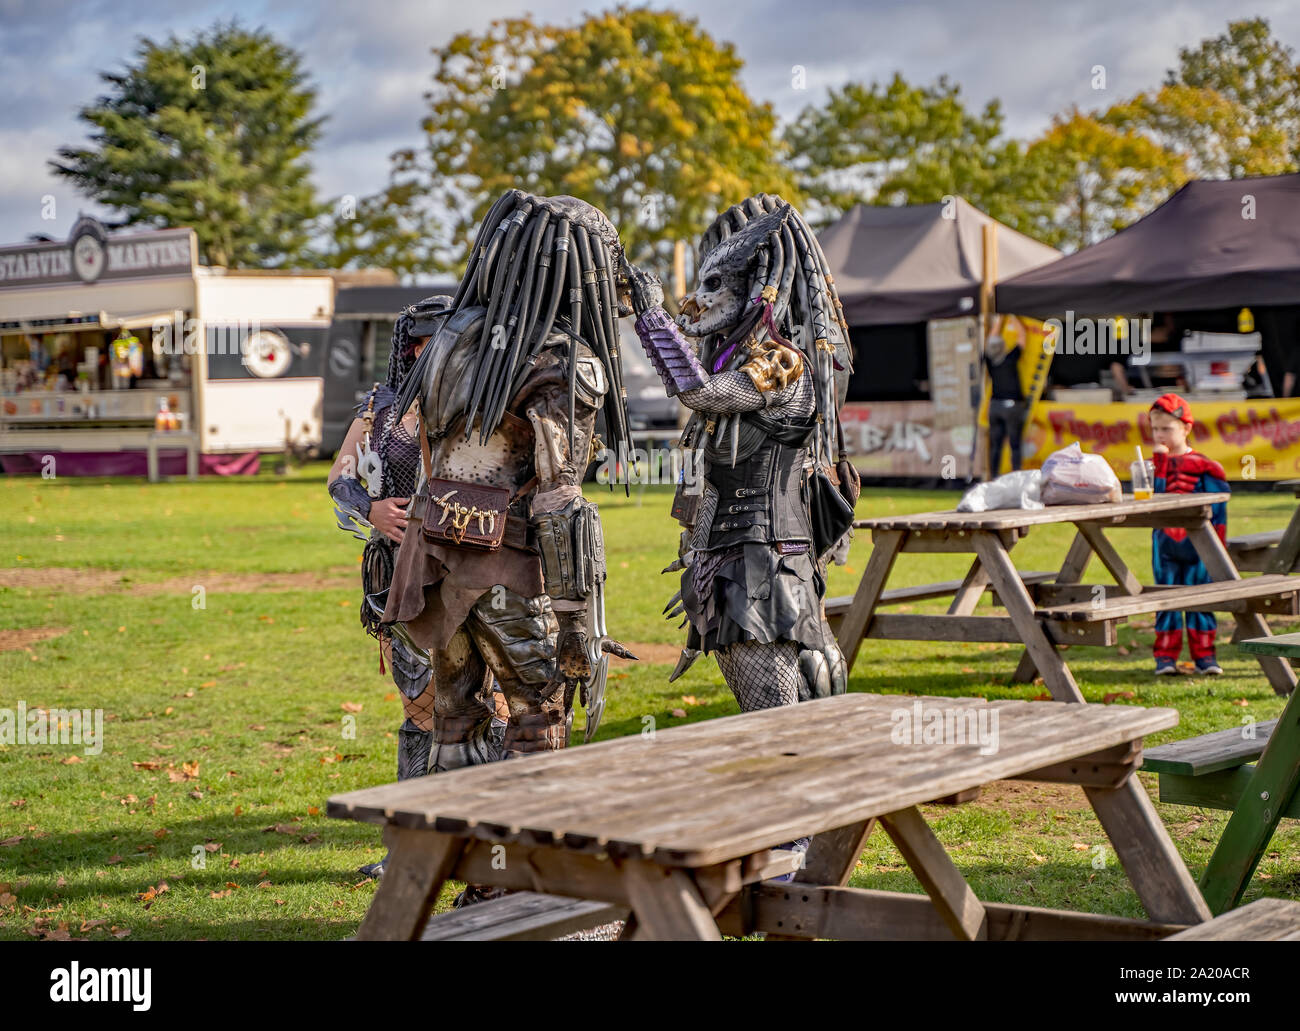 Small group of people in fancy dress as characters from the Sci-fi movie, Predator, getting ready to entertain the crowd queuing for Nor-Con Stock Photo